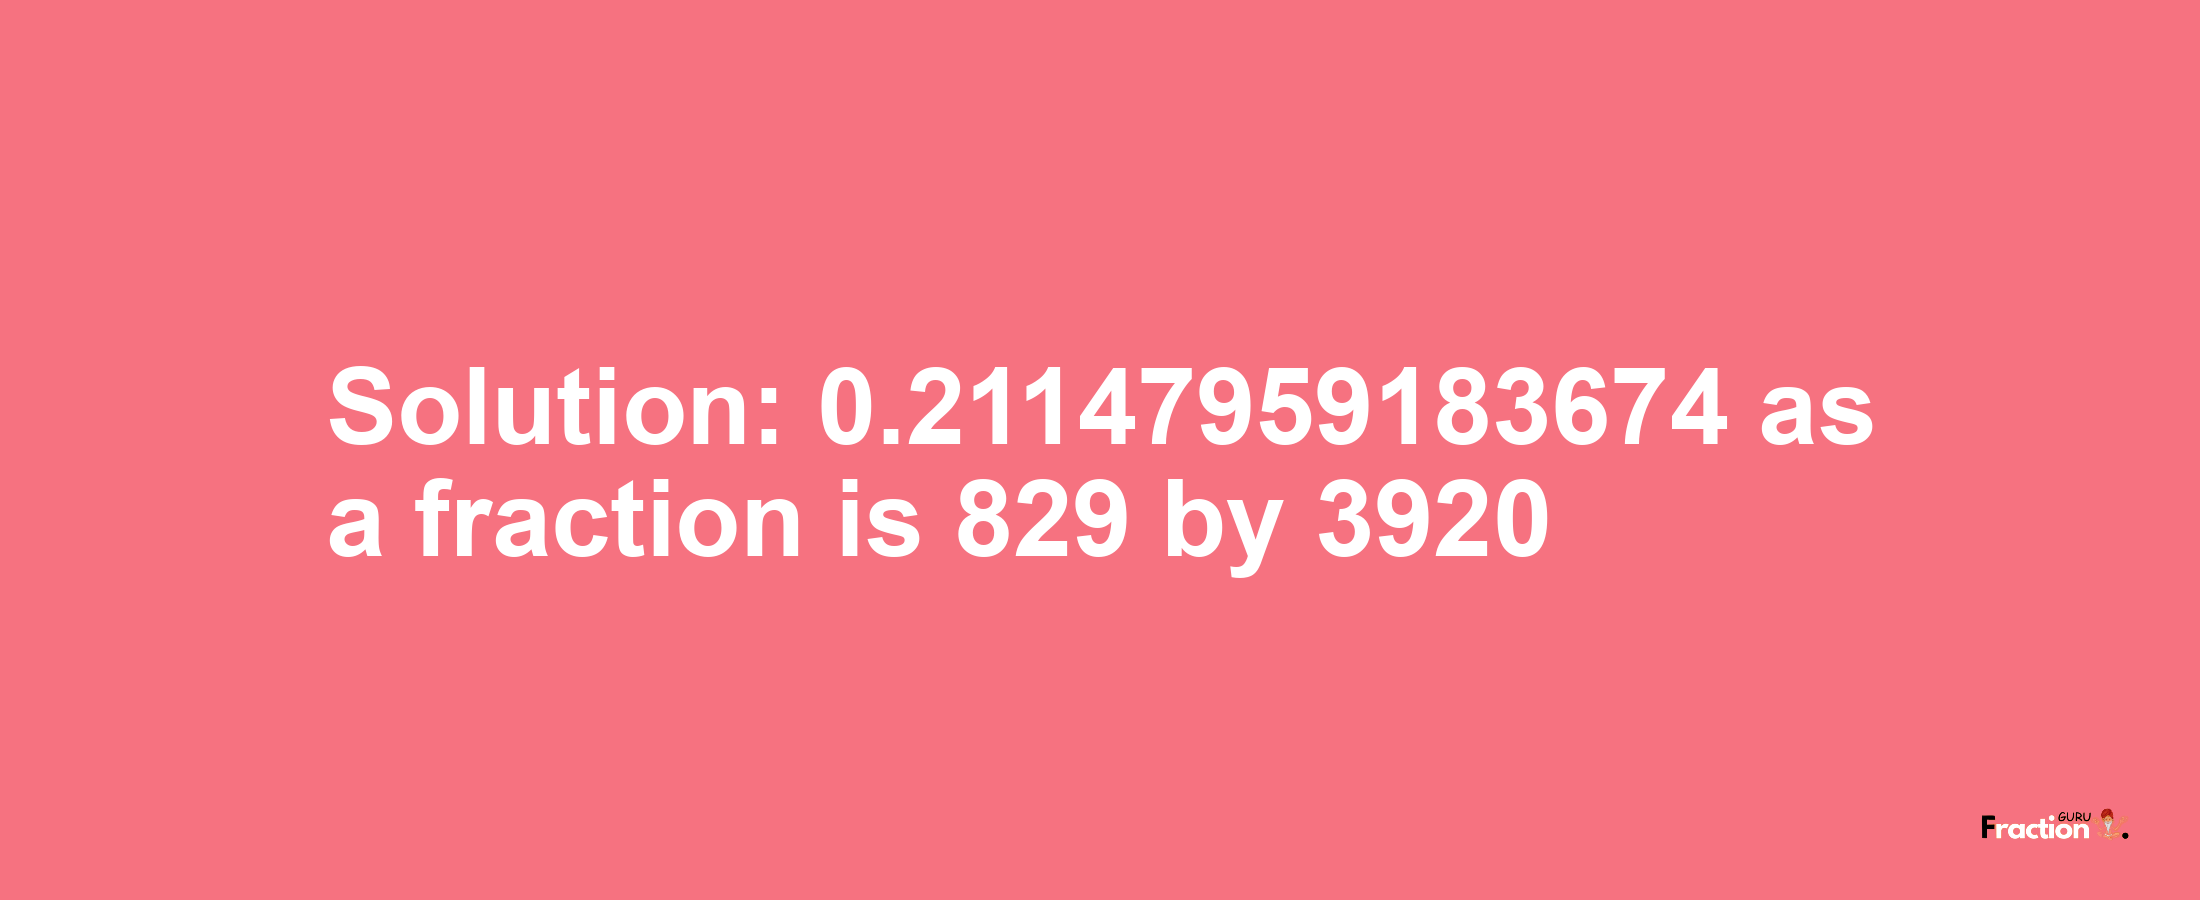 Solution:0.21147959183674 as a fraction is 829/3920